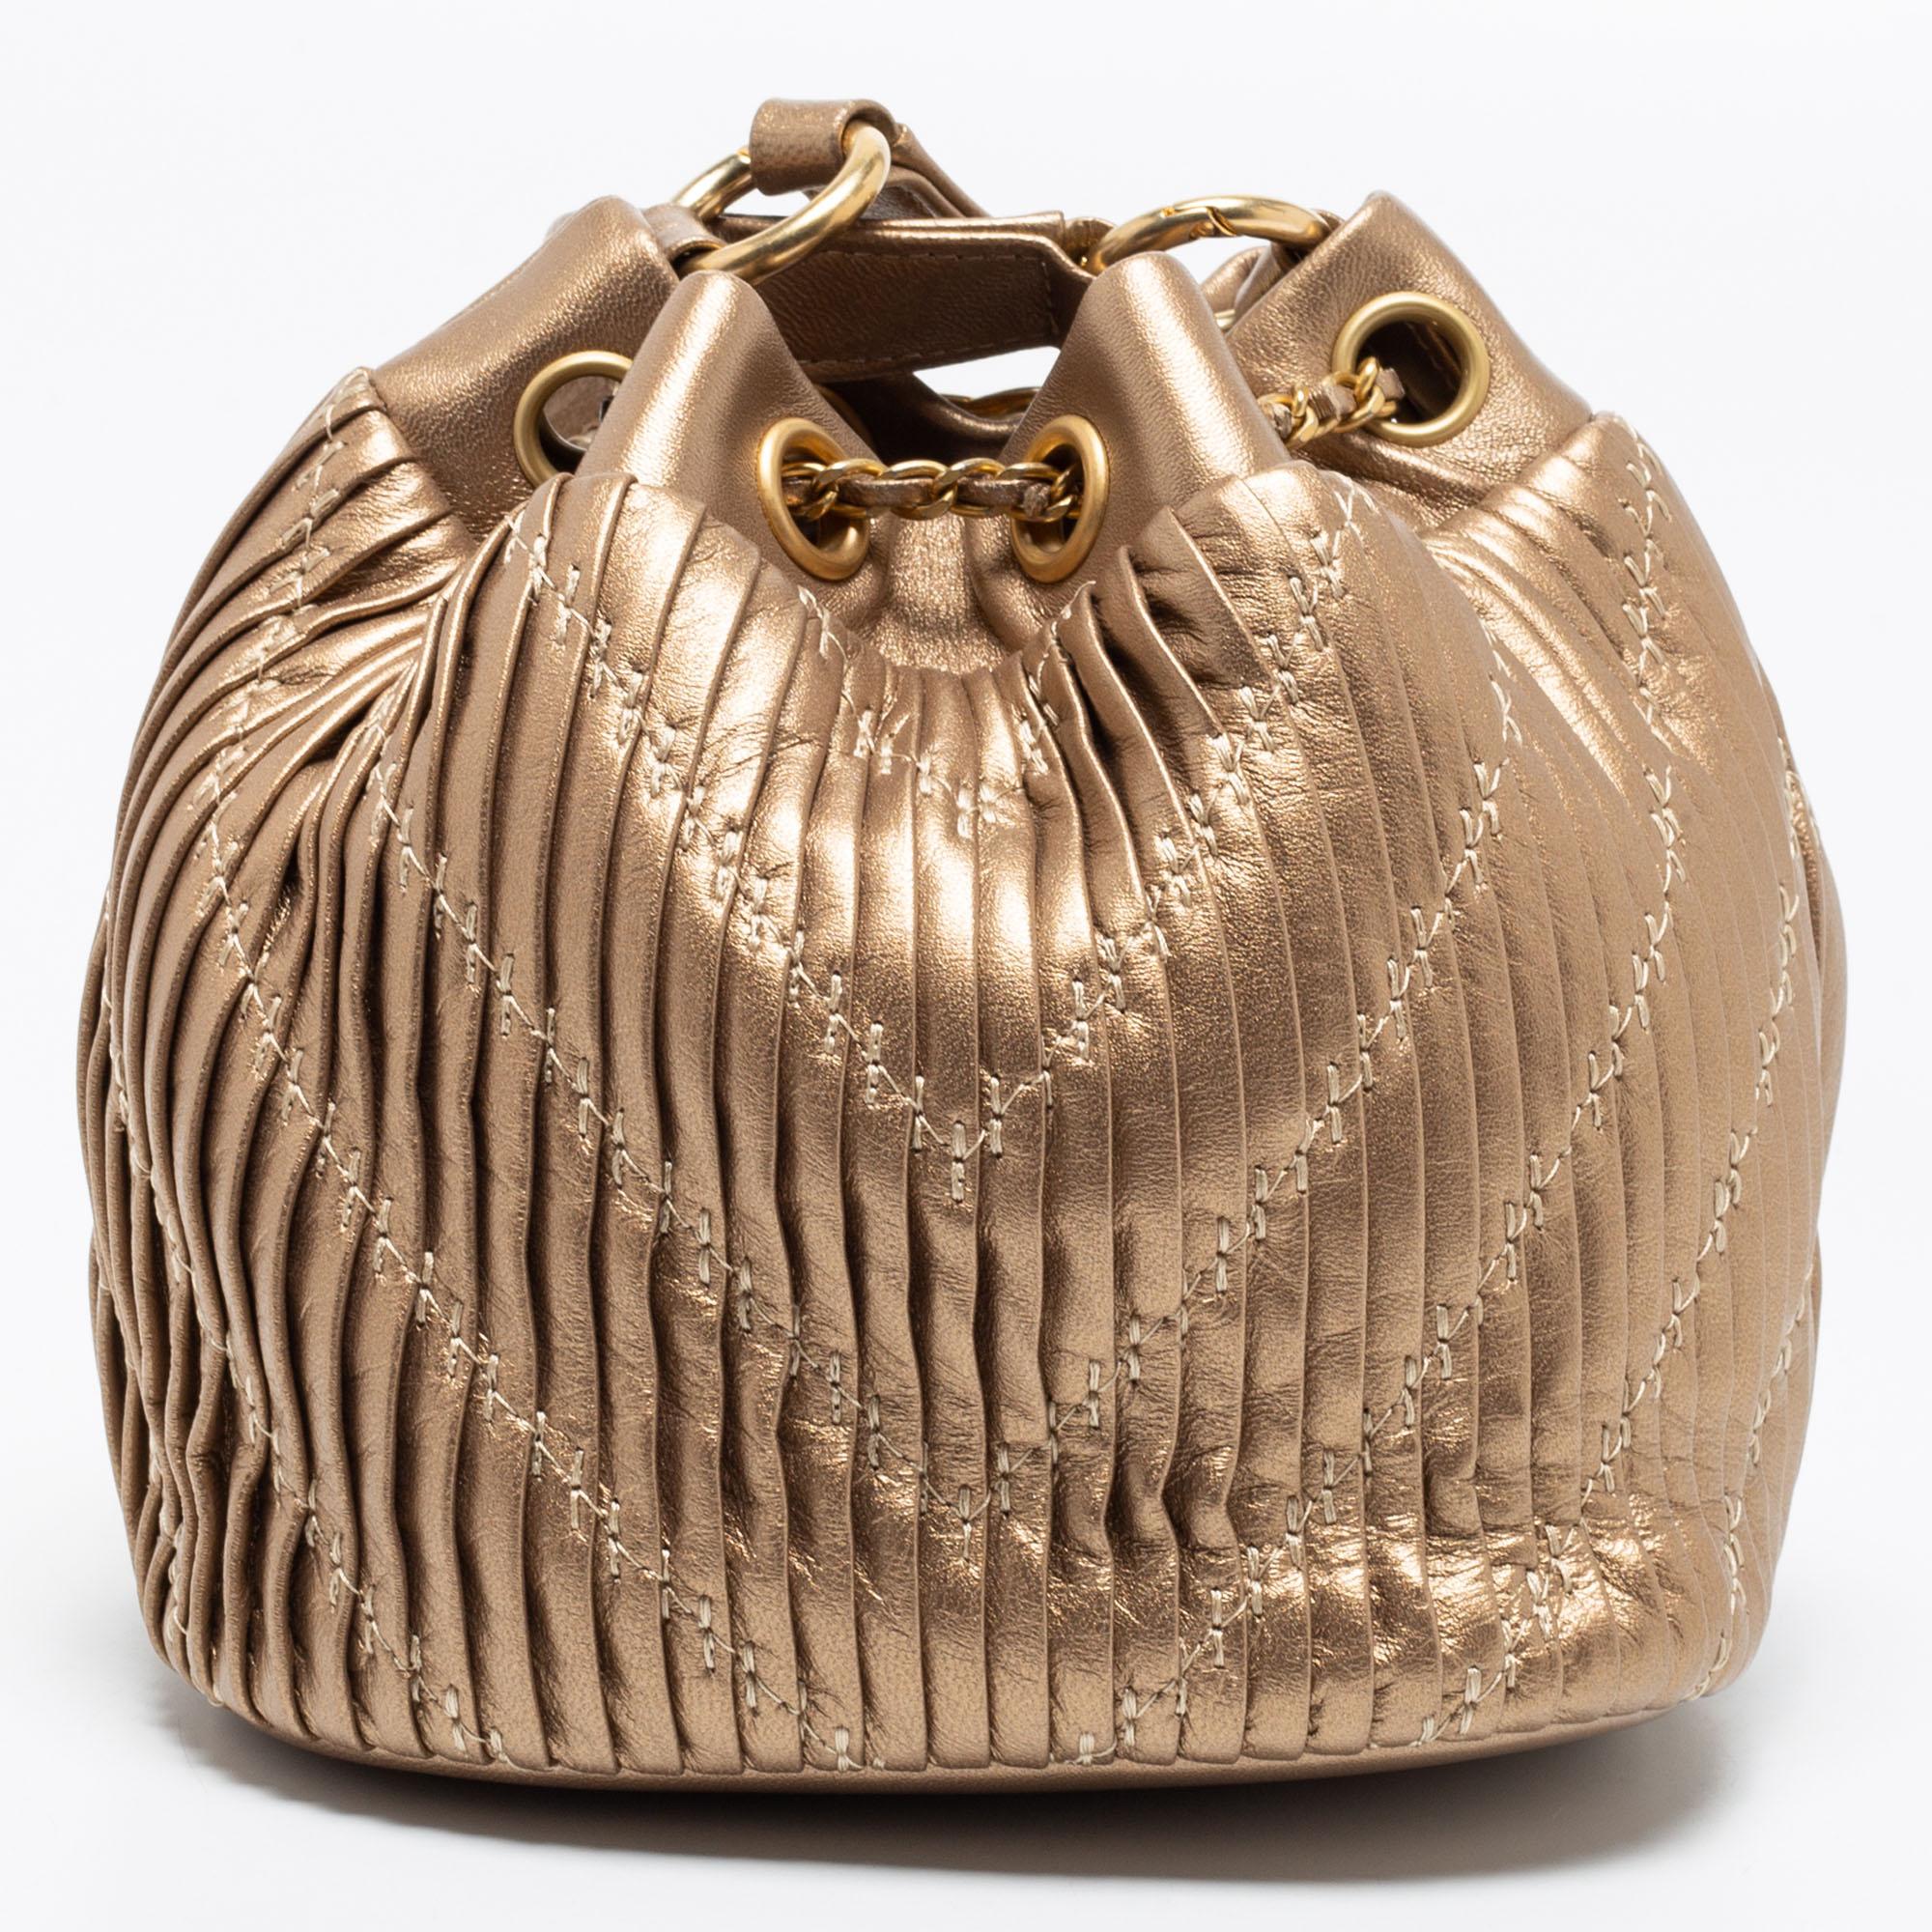 You will enjoy parading this mesmerizing bucket bag from Chanel. It comes made from pleated leather and features a long shoulder strap. The gold-hued beauty is equipped with a fabric interior meant to hold all your party essentials with